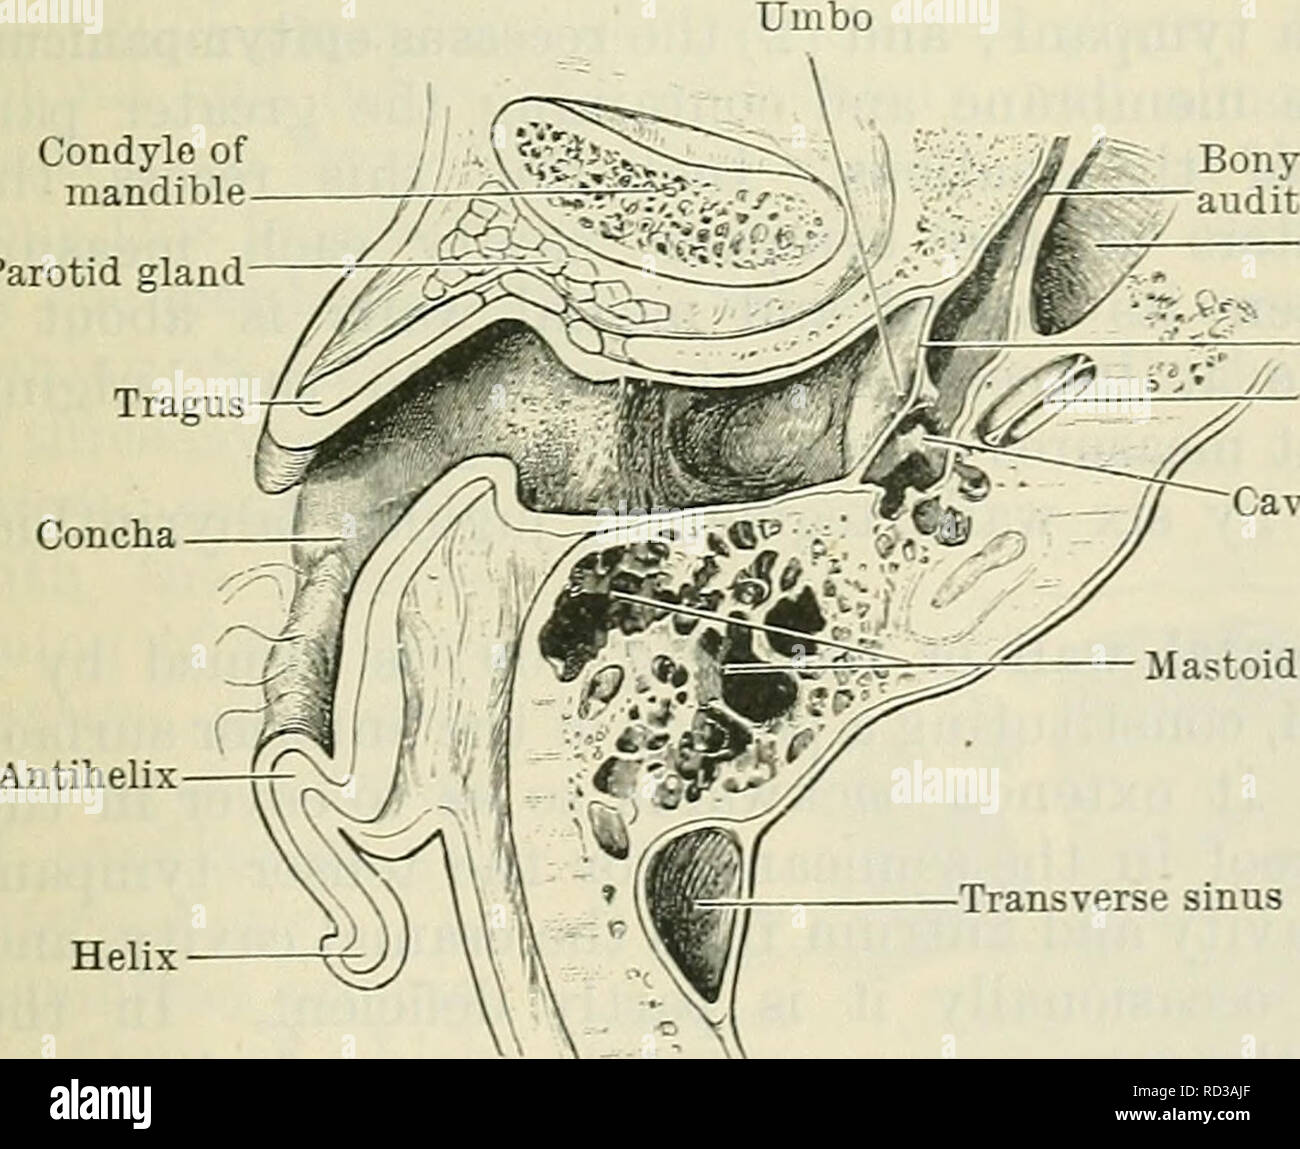 . Cunningham's Text-book of anatomy. Anatomy. Pars ossea of external acoustic meatu Recessus epitympanicus Malleus Cochlea Cavum tympani Membrana tympani Internal carotid artery Crus antihelicis inferior = Cyrnba conchse Crus helicis Pars cartilaginea of external acoustic meatus Cavum conchse Lower boundary of incisura intertragica Fig. 707. Frontal Section of Eight Ear : Anterior Half of Section, viewed from behind (natural size). finger into the meatus, and then alternately opening and shutting the mouth. The condyle of the mandible lies in front of the pars ossea, while between the condyle Stock Photo